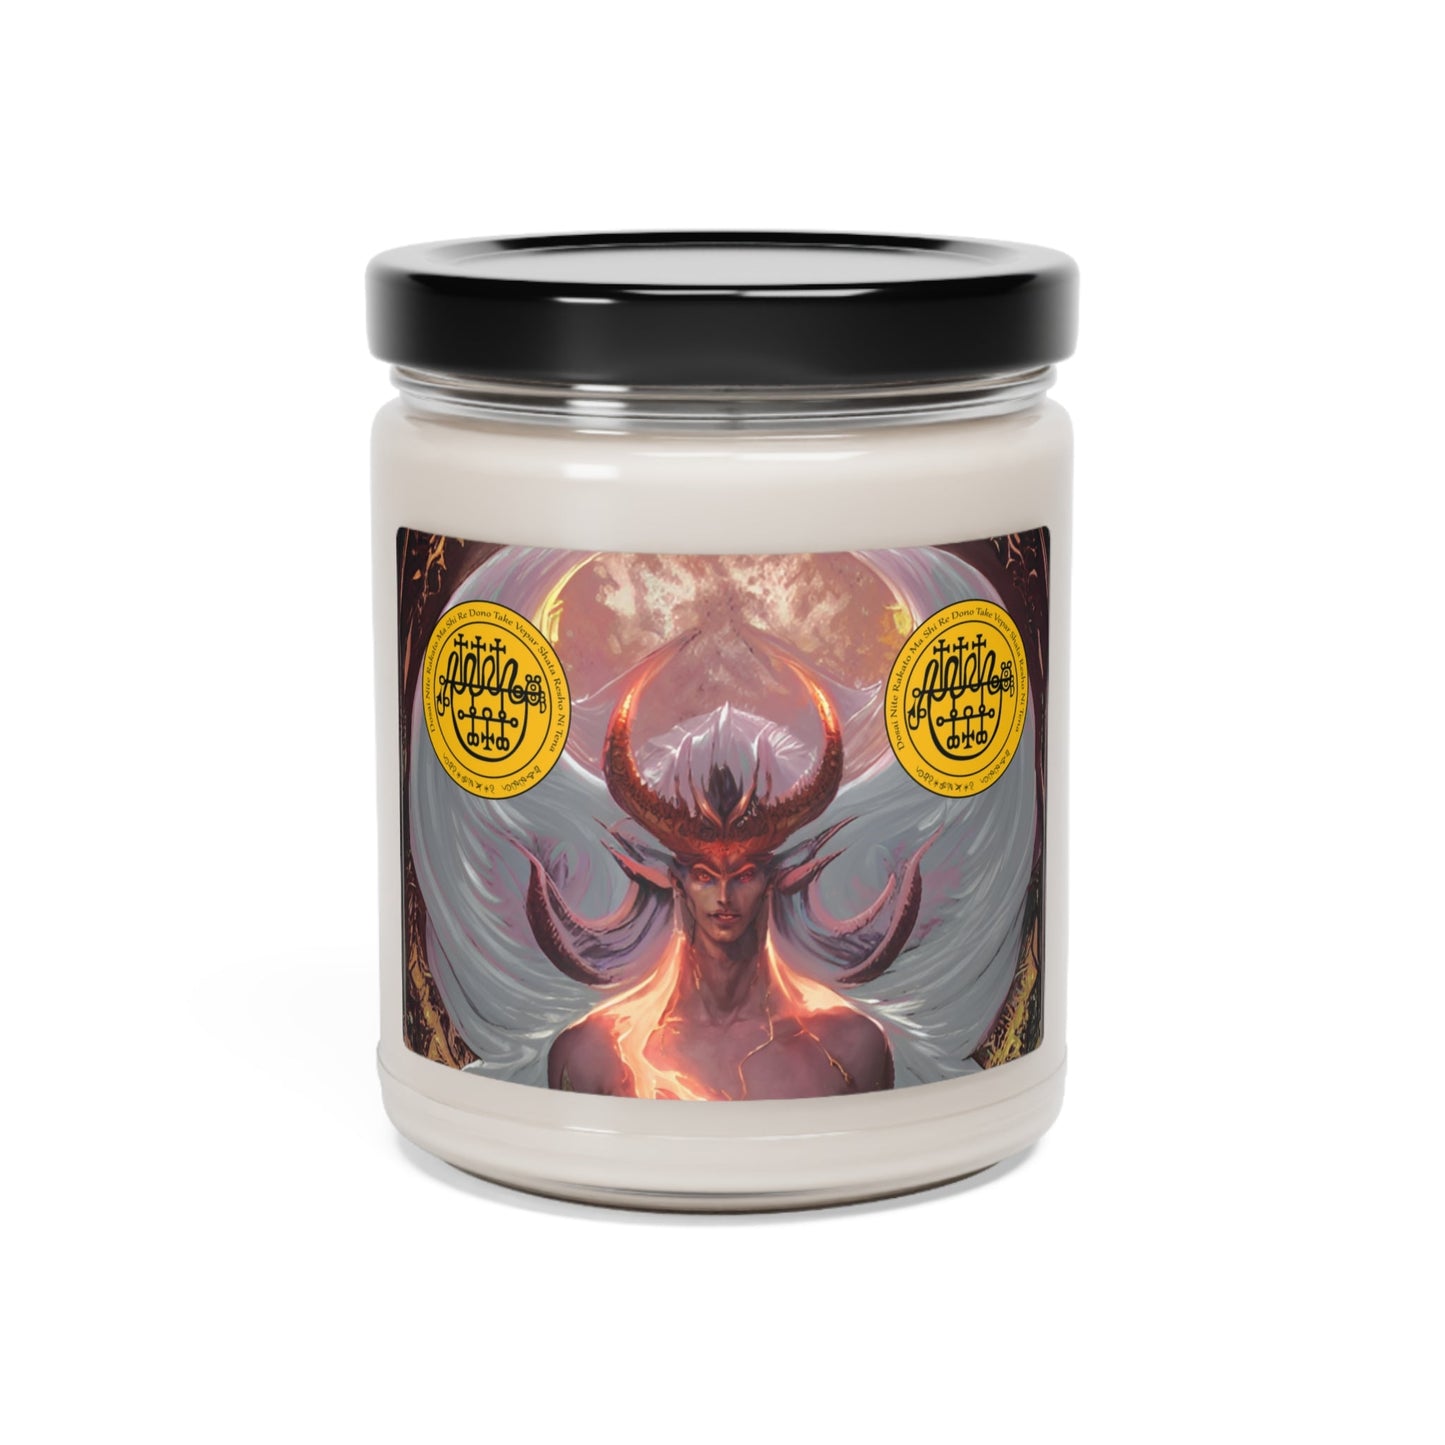 Demon-Vepar-Altar-Scented-Soy-Candle-for-offerings-rituals-initiations-o-praying-and-medtation-21